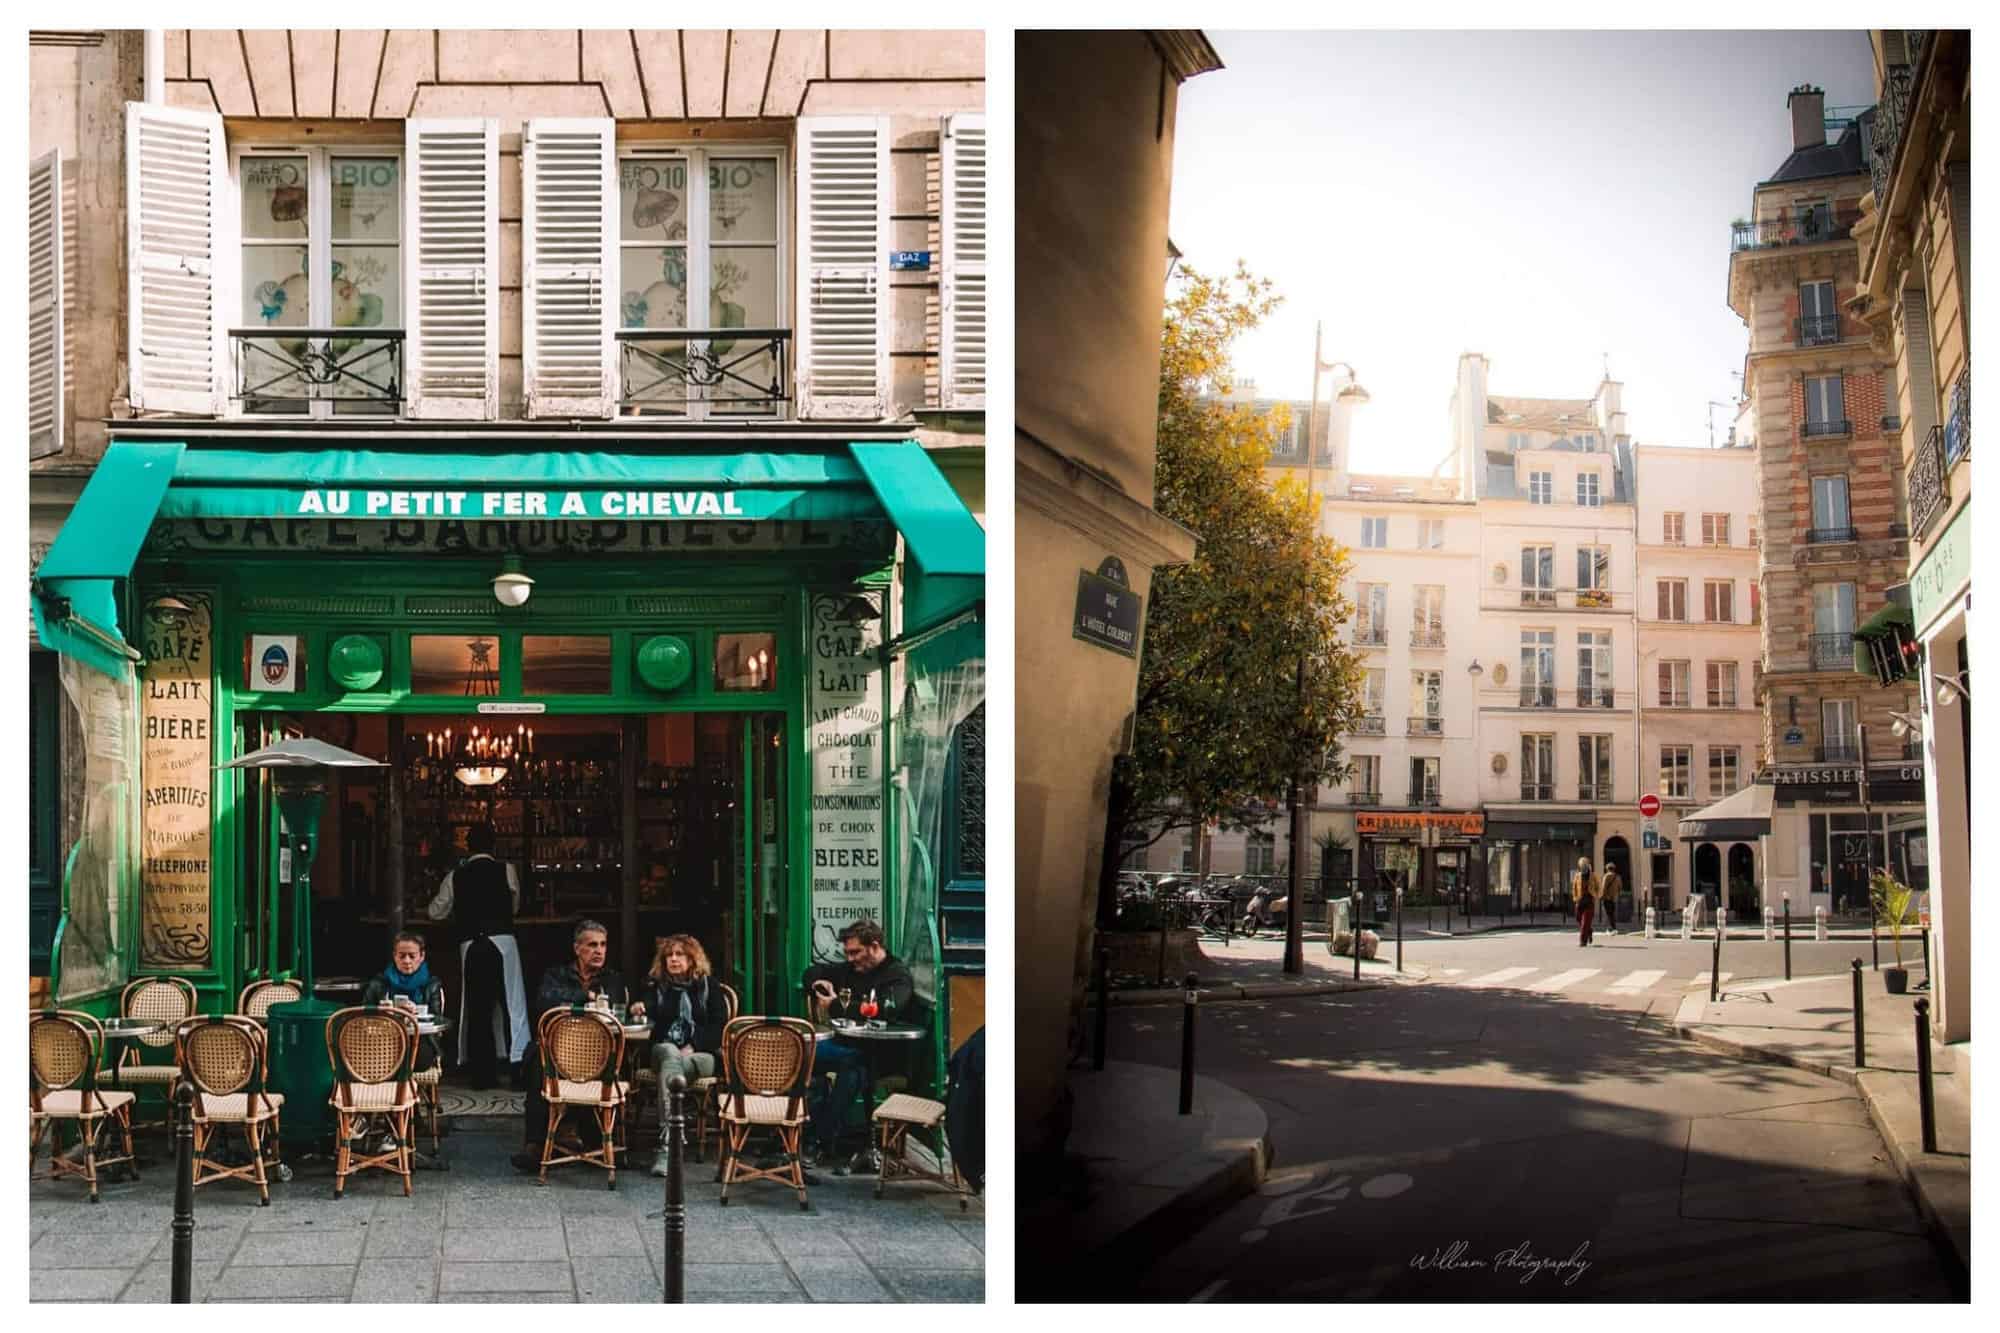 Right: A Parisian bistrot with green walls and decor and beige basket chairs. Left: A quiet Parisian street with white buildings and a green tree.